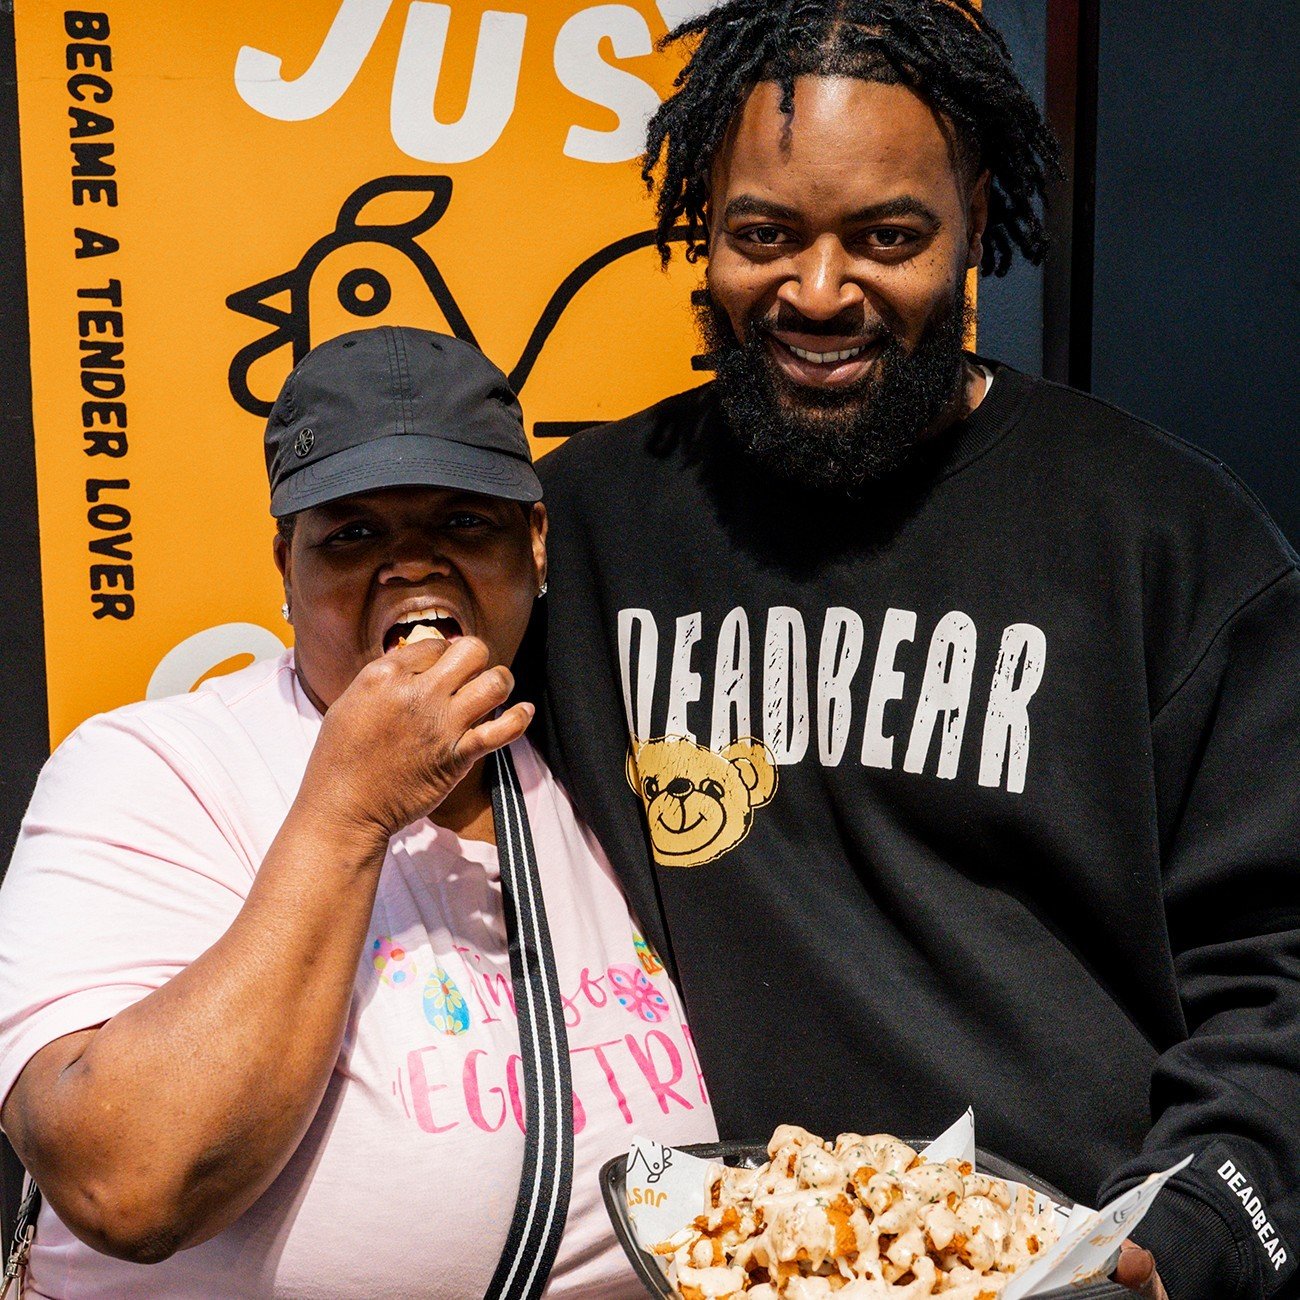 It's all about bringing friends and families together to enjoy a CRUNCHY, JUICY MEAL!

We love seeing old friends reconnect and start new traditions at Just Chicken. Who's that somebody you've been meaning to hit up? Here's your reminder. Have them m